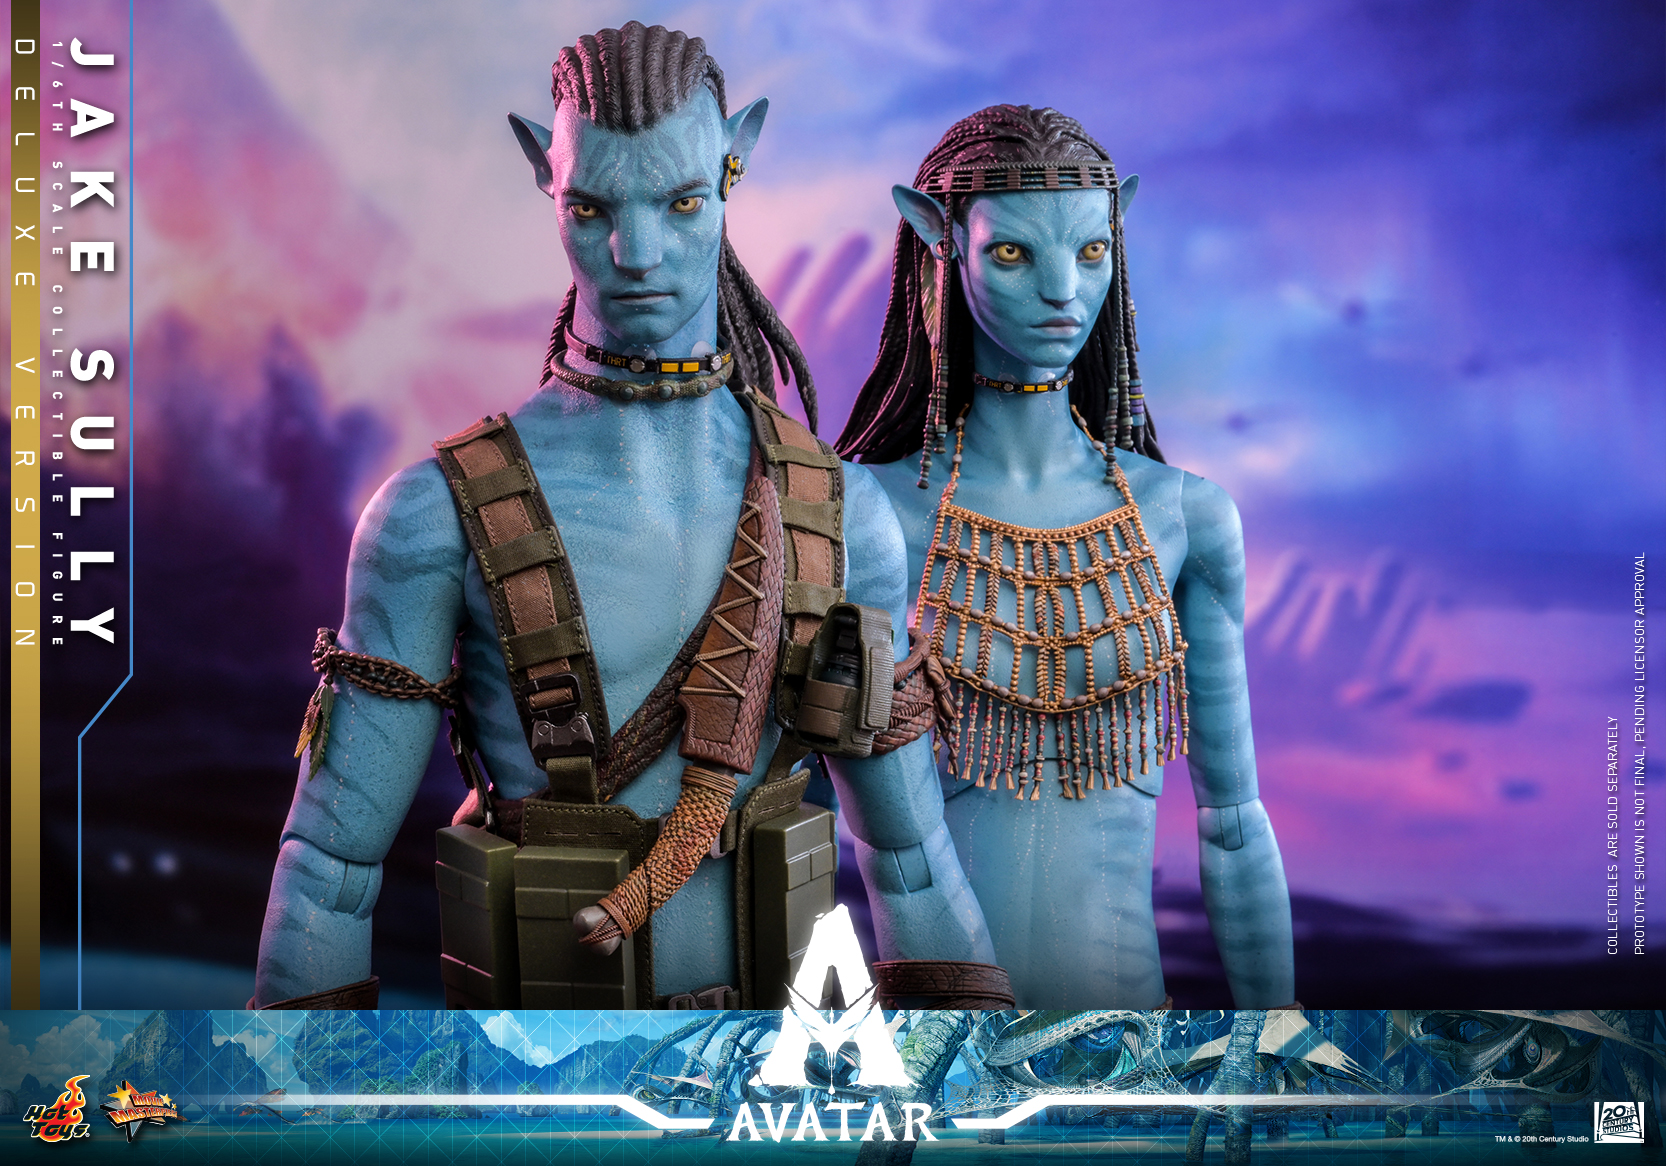 Hot Toys - Avatar 2 - Jake Sully collectible figure (Deluxe)_PR15